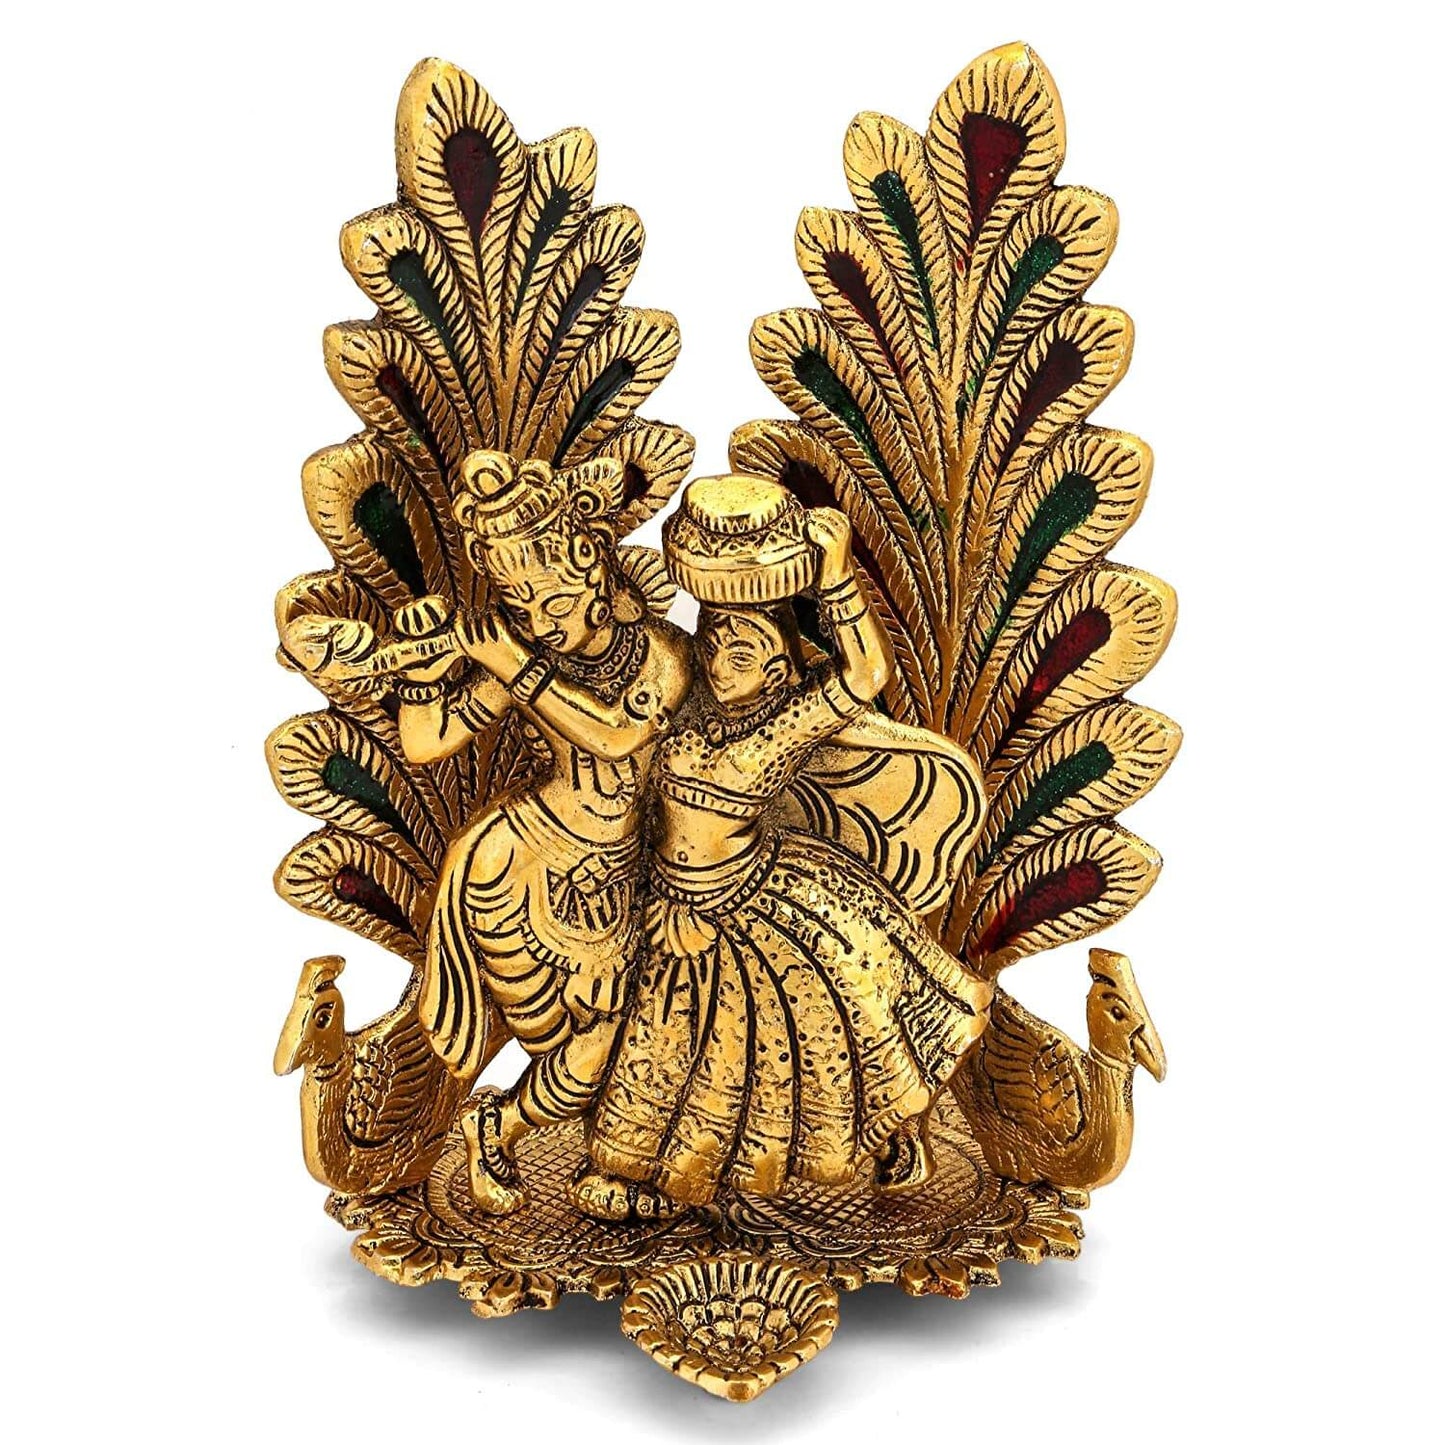 Pack of 1 - Peacock Design Radha Krishna Idol Showpiece with Diya for Puja, Home Decor and Gifting (8 x 6 Inches) Mangal Fashions | Indian Home Decor and Craft